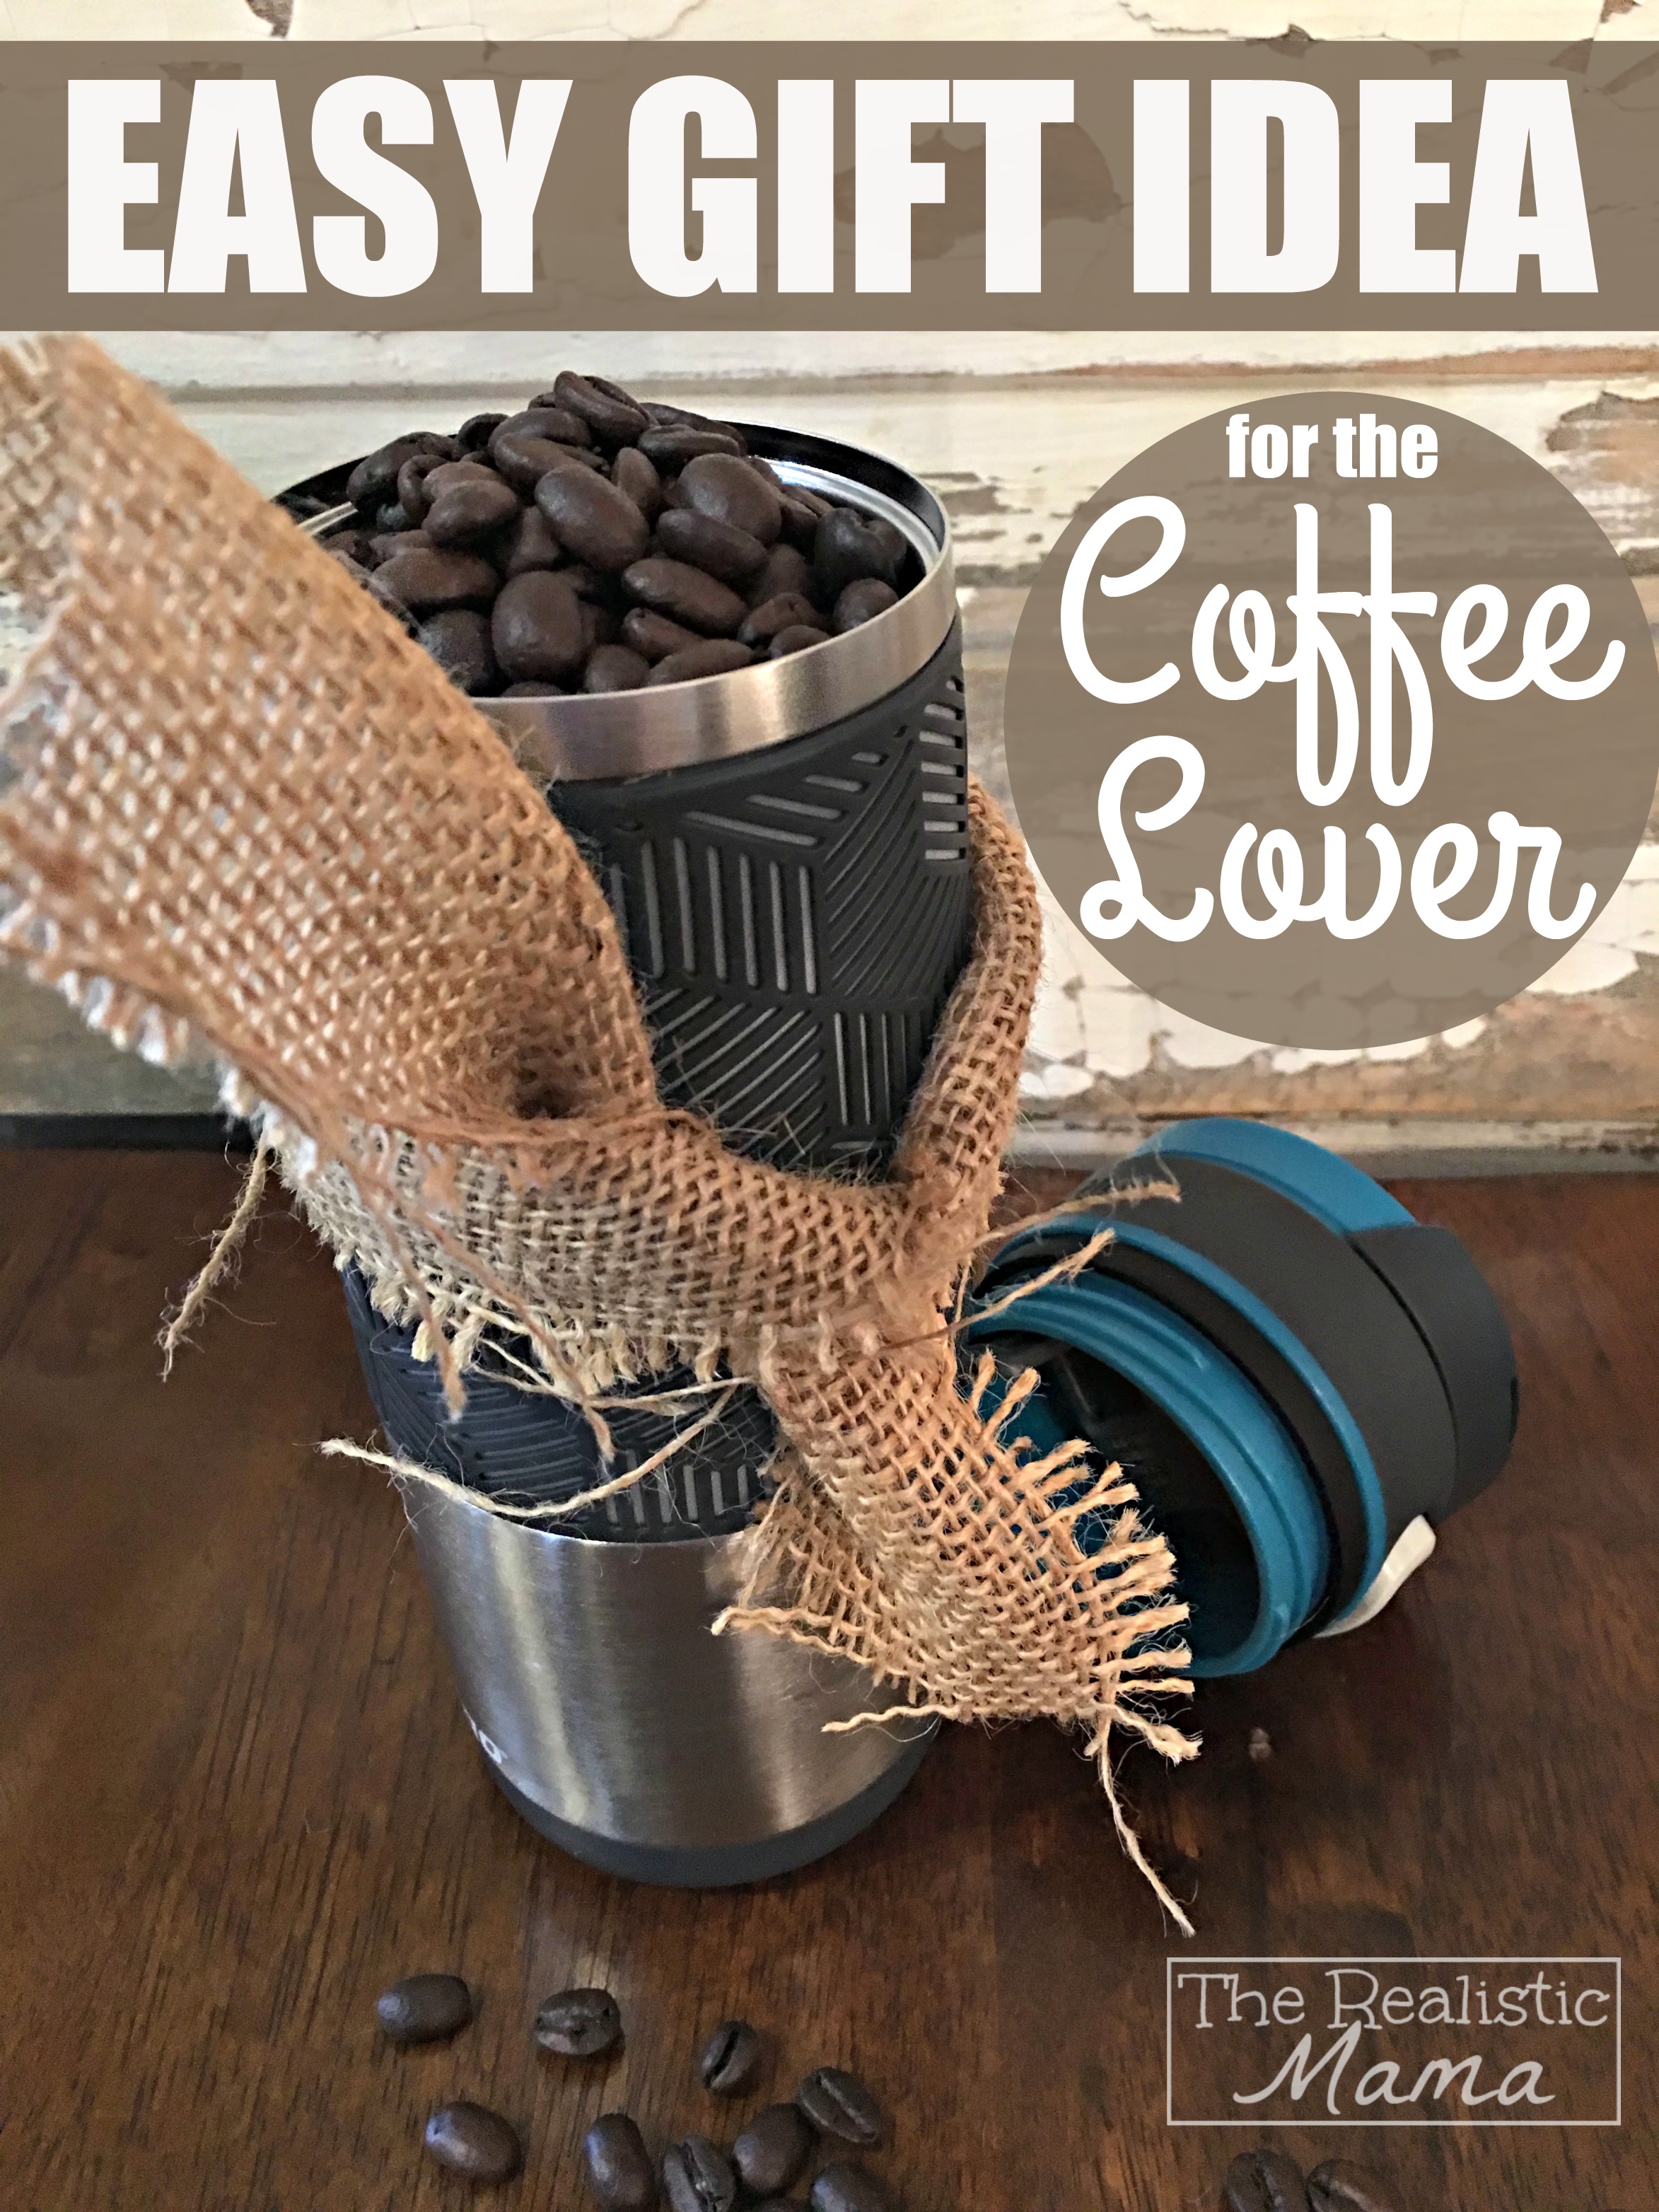 Easy Gift Idea for the Coffee Lover!